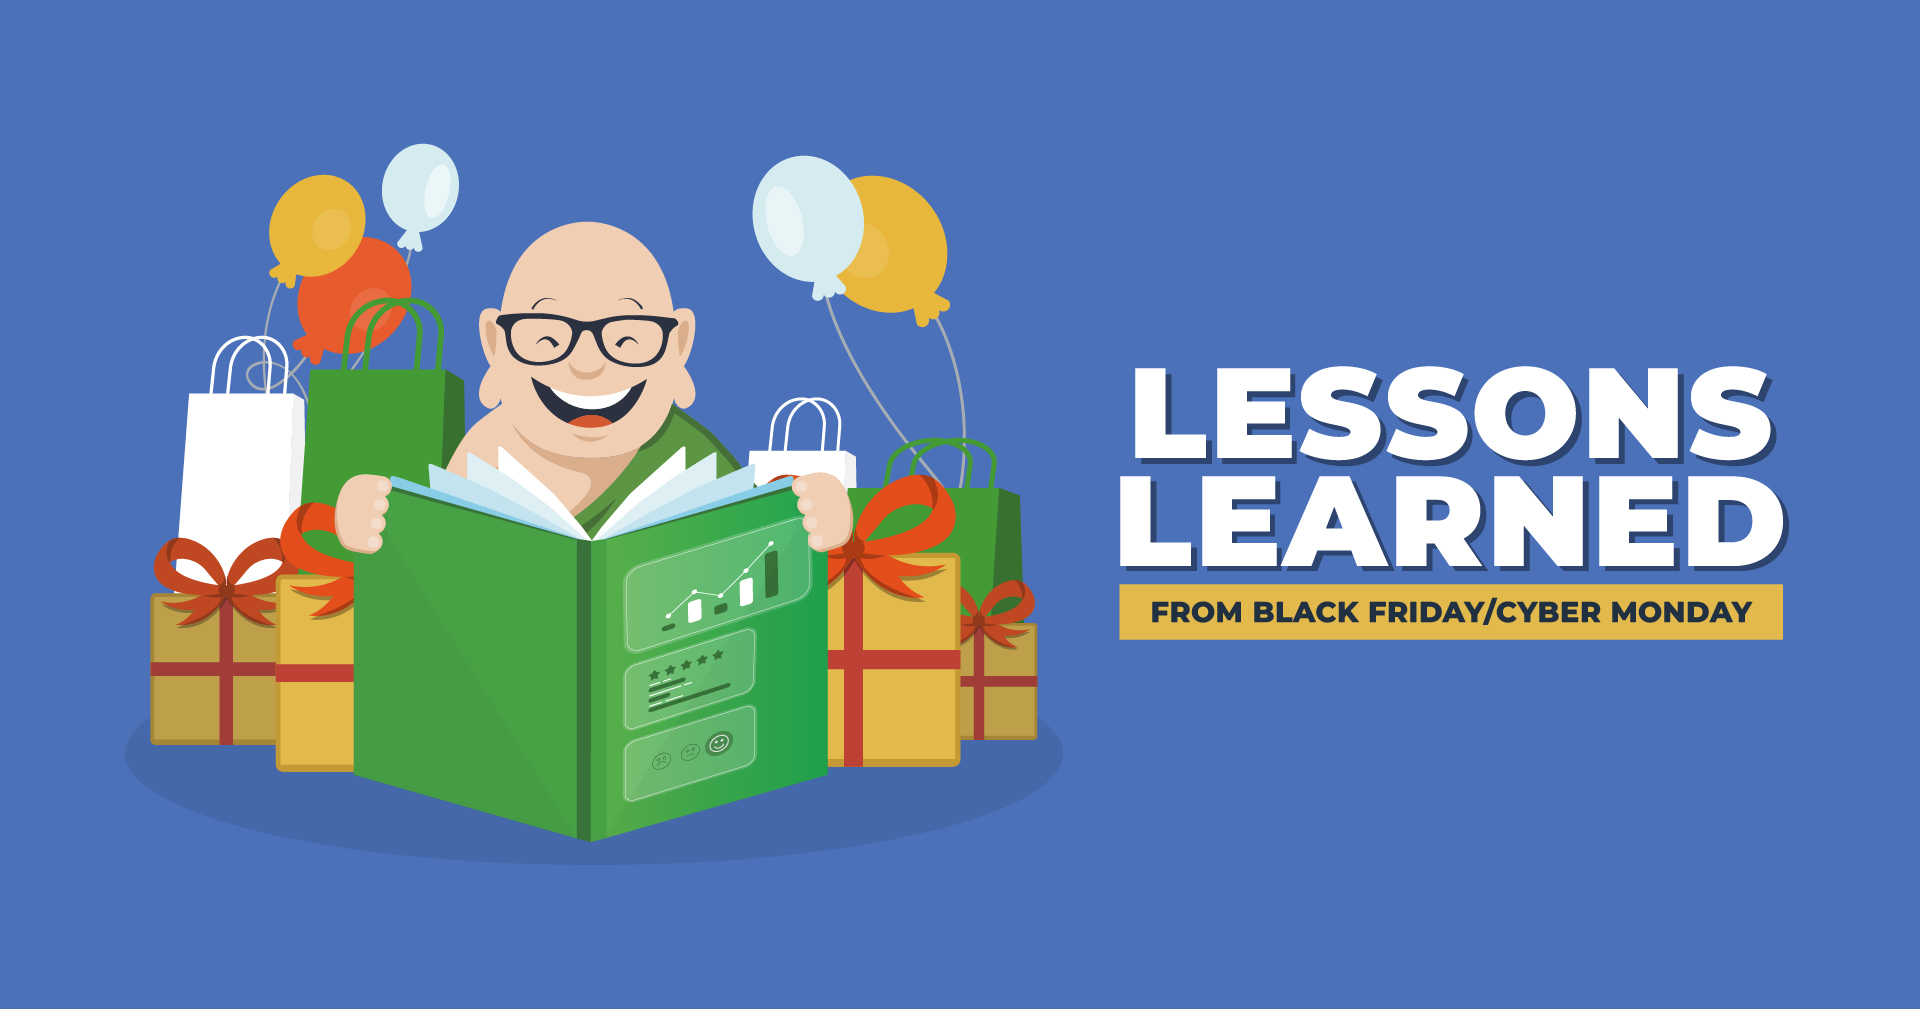 Lessons Learned from Black Friday/Cyber Monday